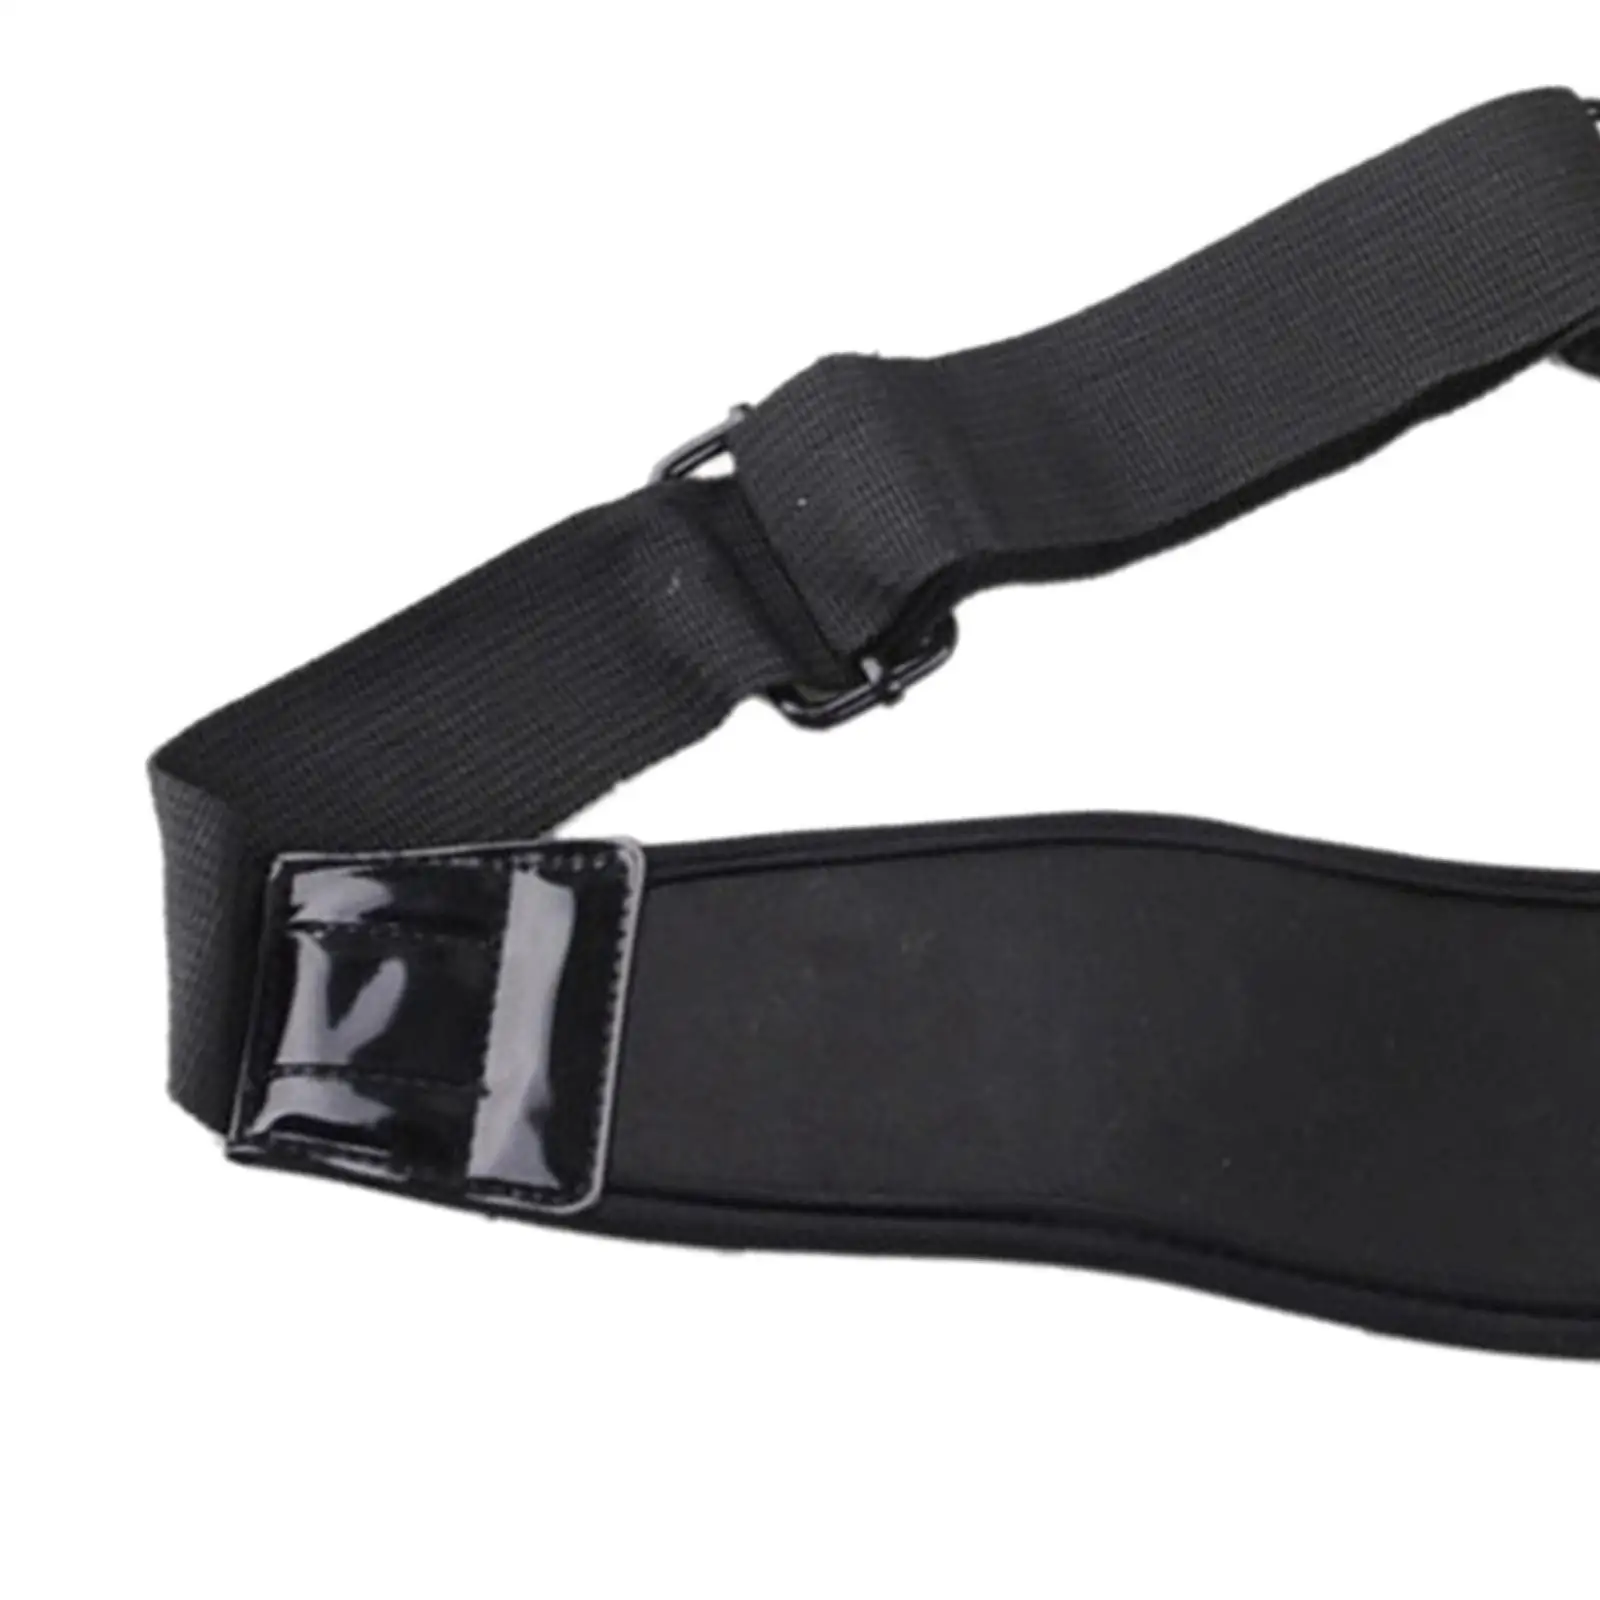 Universal Shoulder Strap Belt Durable Black Anti Slip 52inch Soft with Metal Hooks Thick Padded for Camera Briefcase Bag Laptop